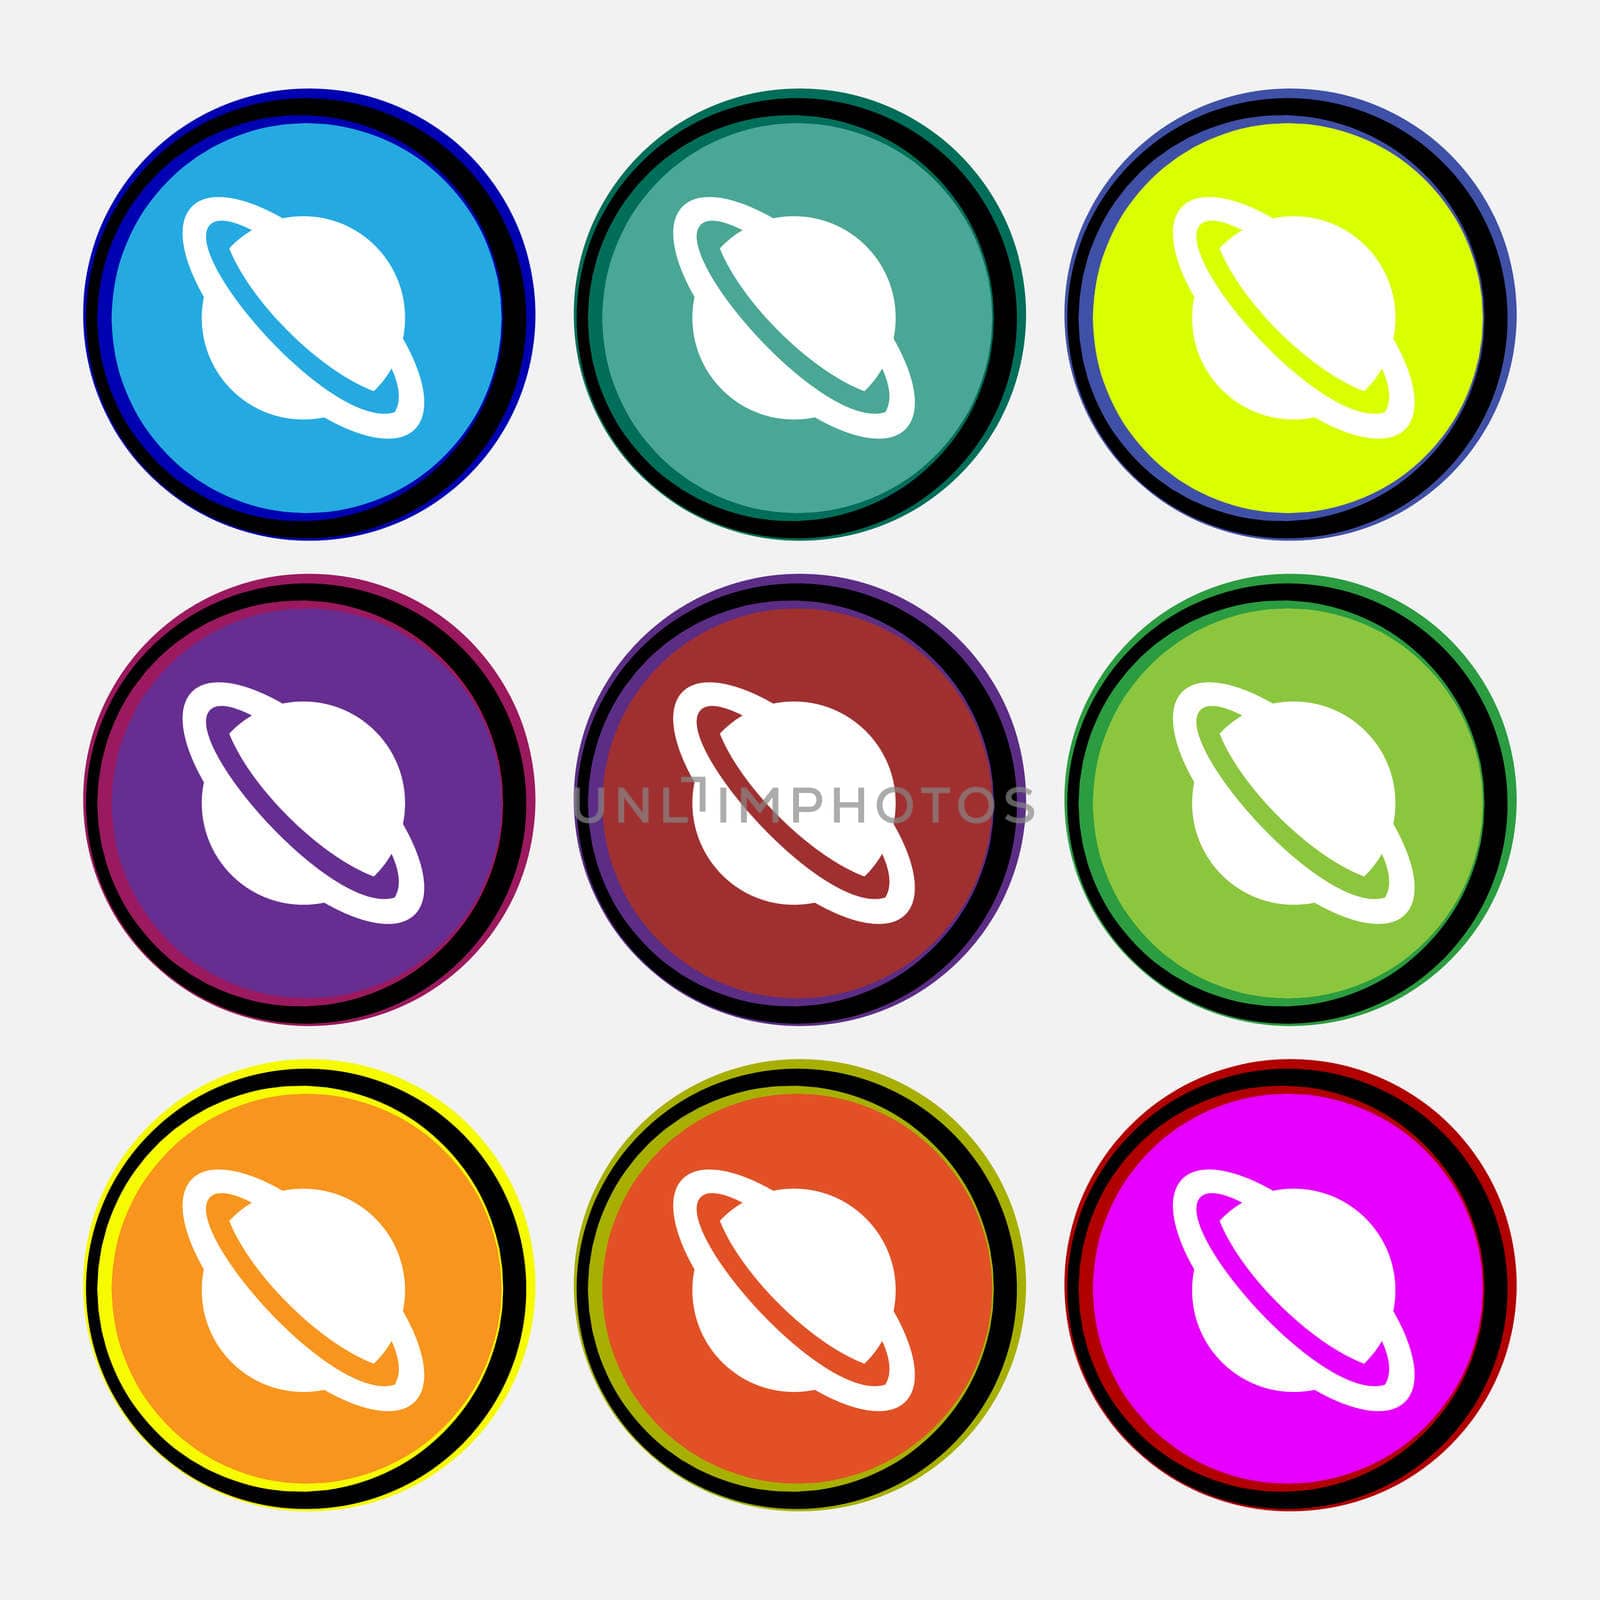 Jupiter planet icon sign. Nine multi-colored round buttons. illustration